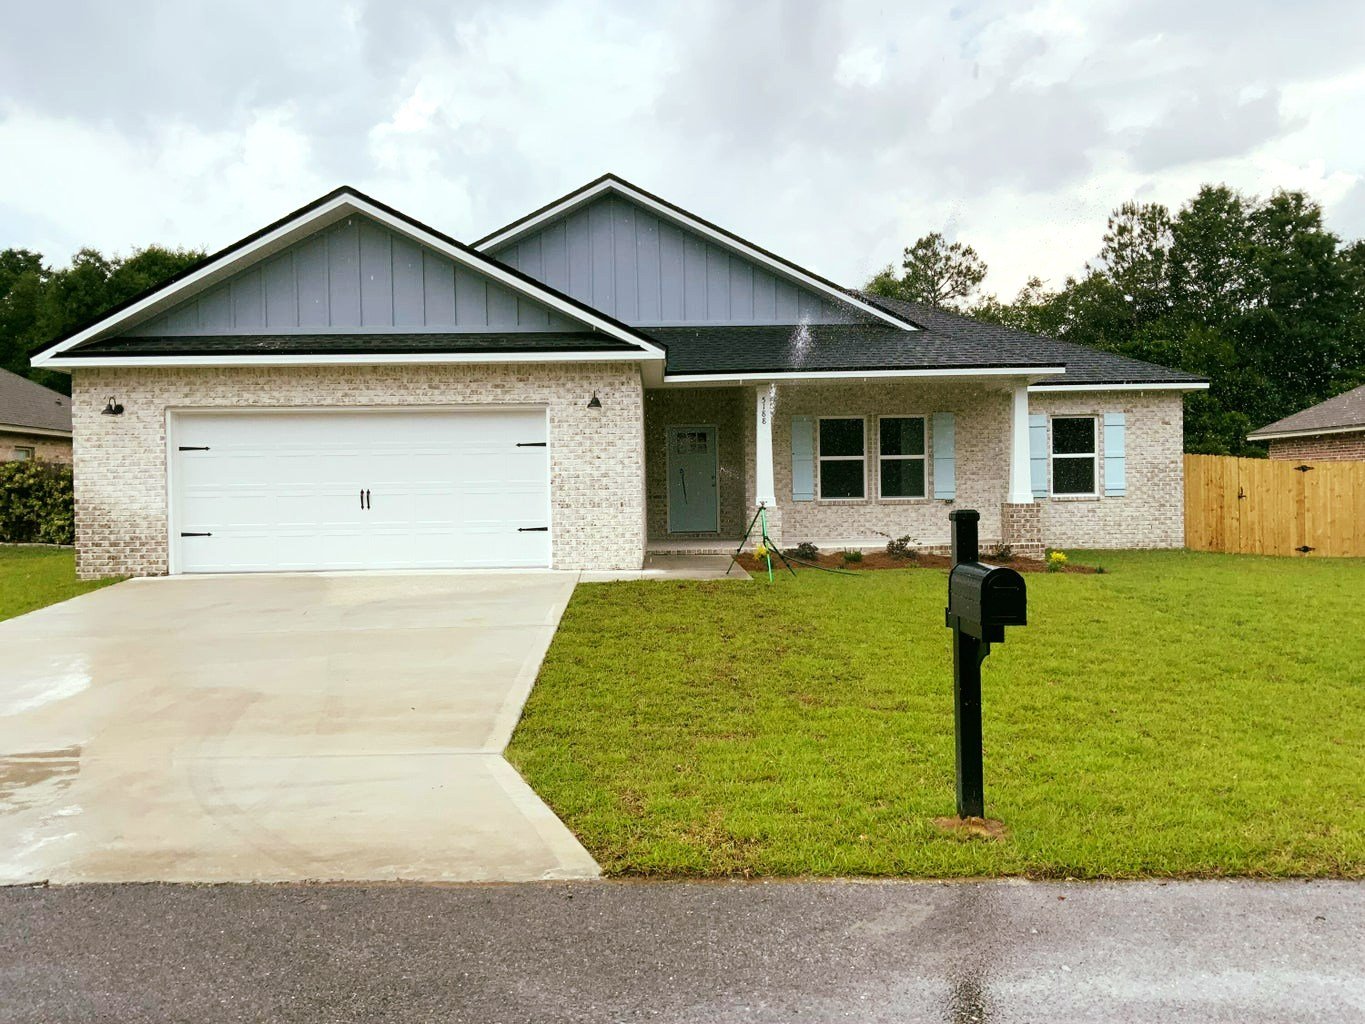 🏡 **SOLD!** 🎉

🌟 Residential Detached Single Family - **SOLD**
💰 Price: $340,000
📍 Address: 5235 Griffith Mill, Baker, FL 32531

🛏️ 4 Beds | 🛁 2 Baths | 🏡 Craftsman Style | 📐 1 Story | 🏗️ Year Built: 2024

Congratulations to the new homeown